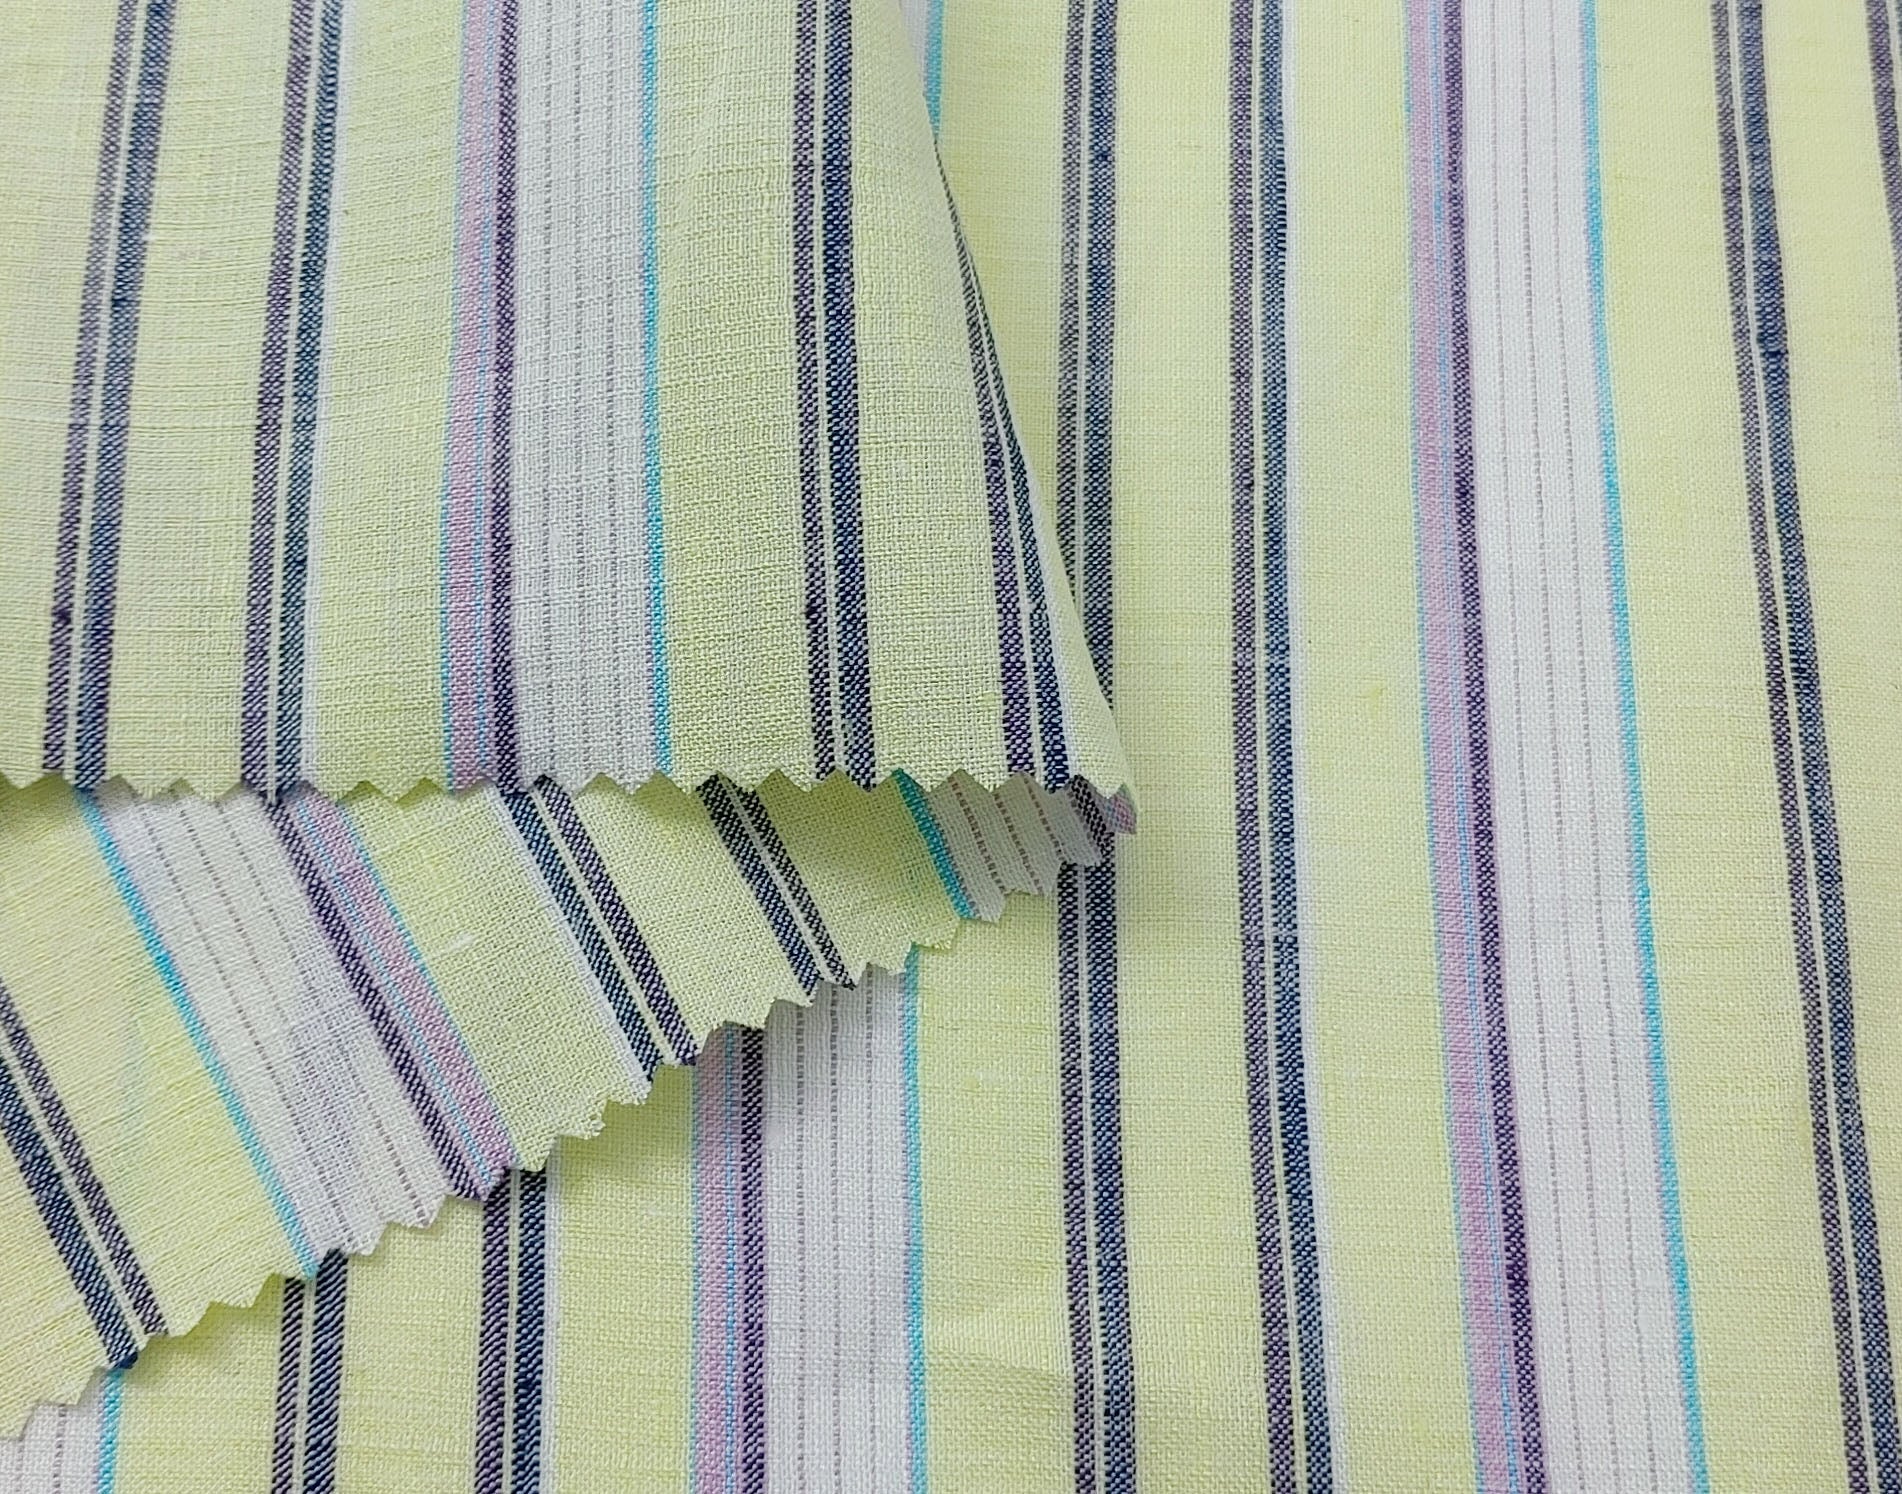 Light Weight Linen Ramie Fabric with Stripe Pattern 2106 - The Linen Lab - Yellow